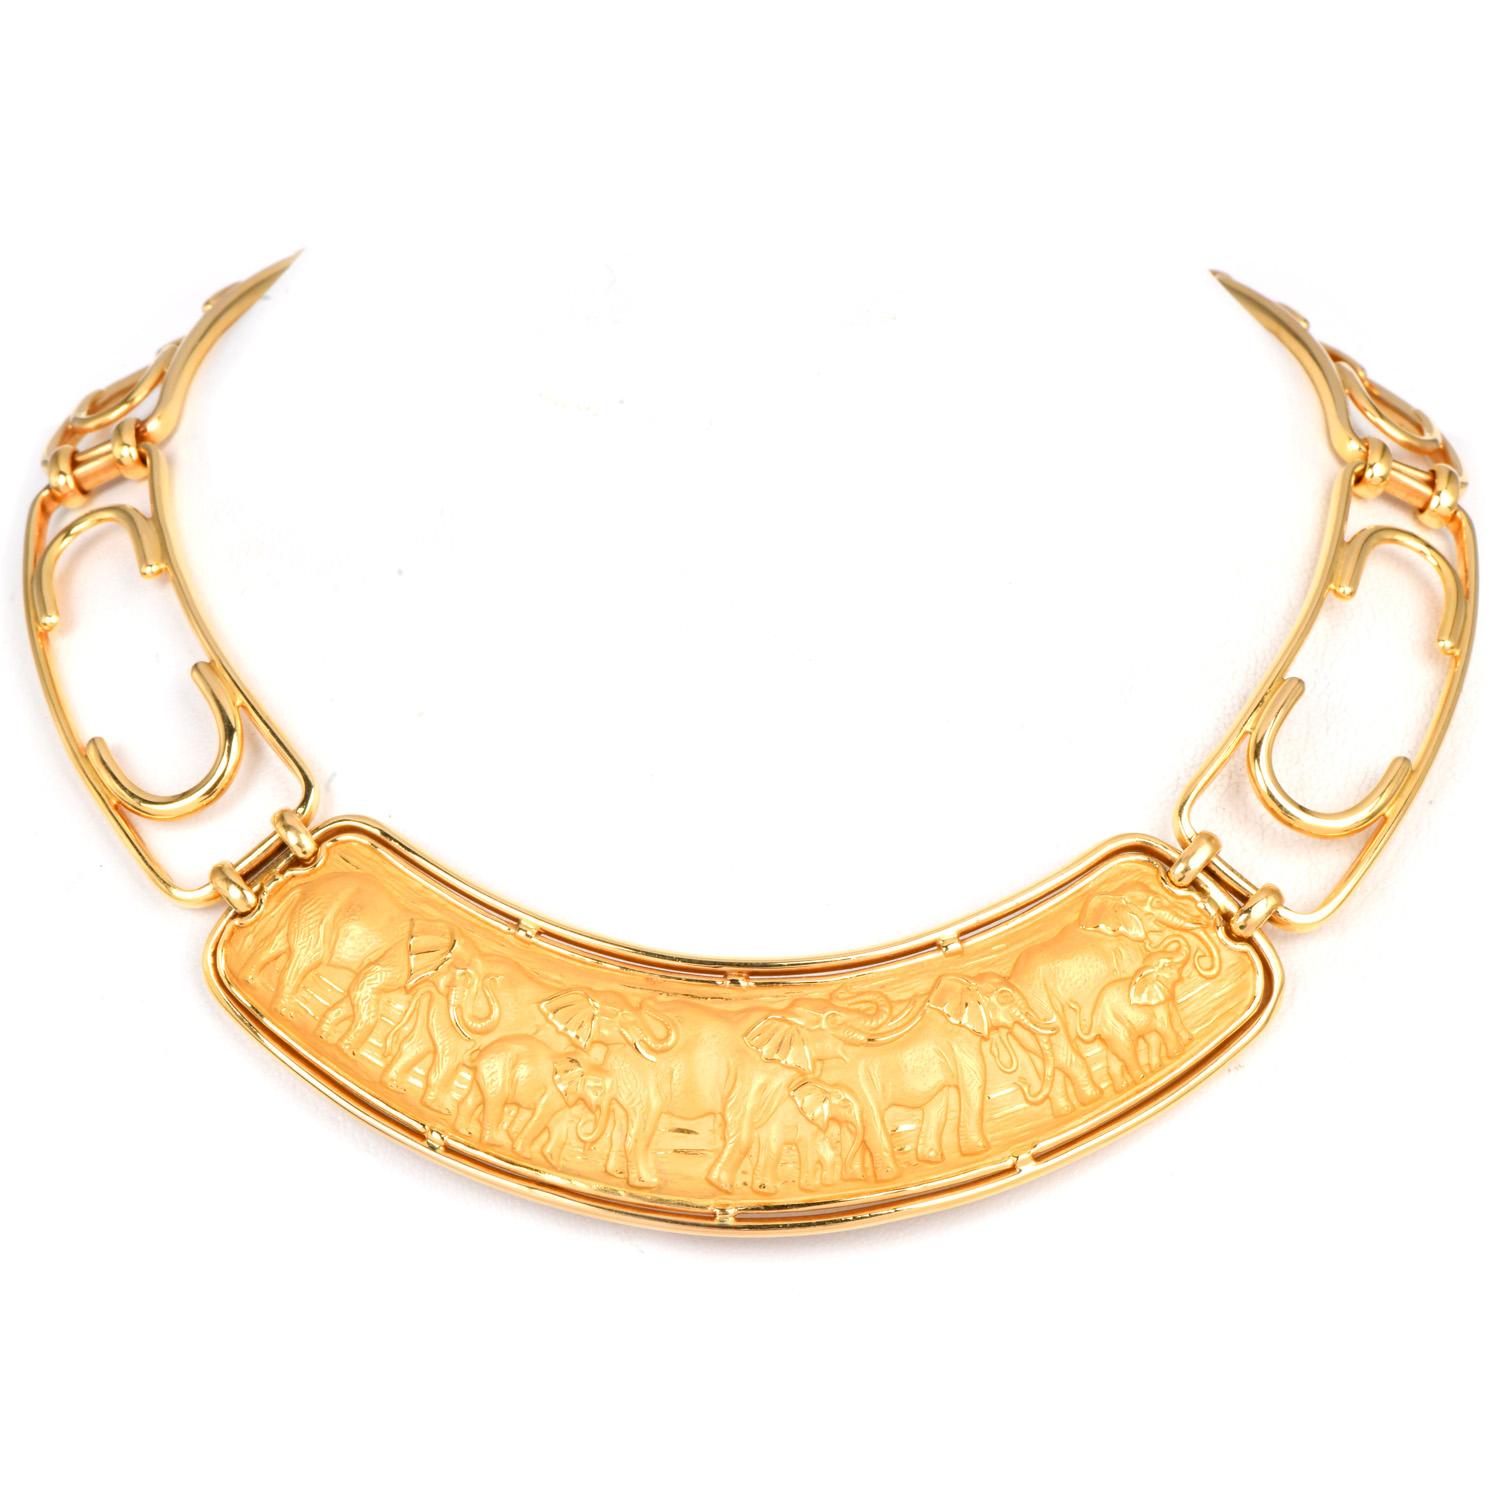 Presenting vintage 18K Yellow Gold Elephant Motif Collar Necklace 

From a well-distinguished legendary Spanish Jewelry Mason Carrera y Carrera world renowned for their expertise in Jewelry Design. Here is an important textured statement Collar